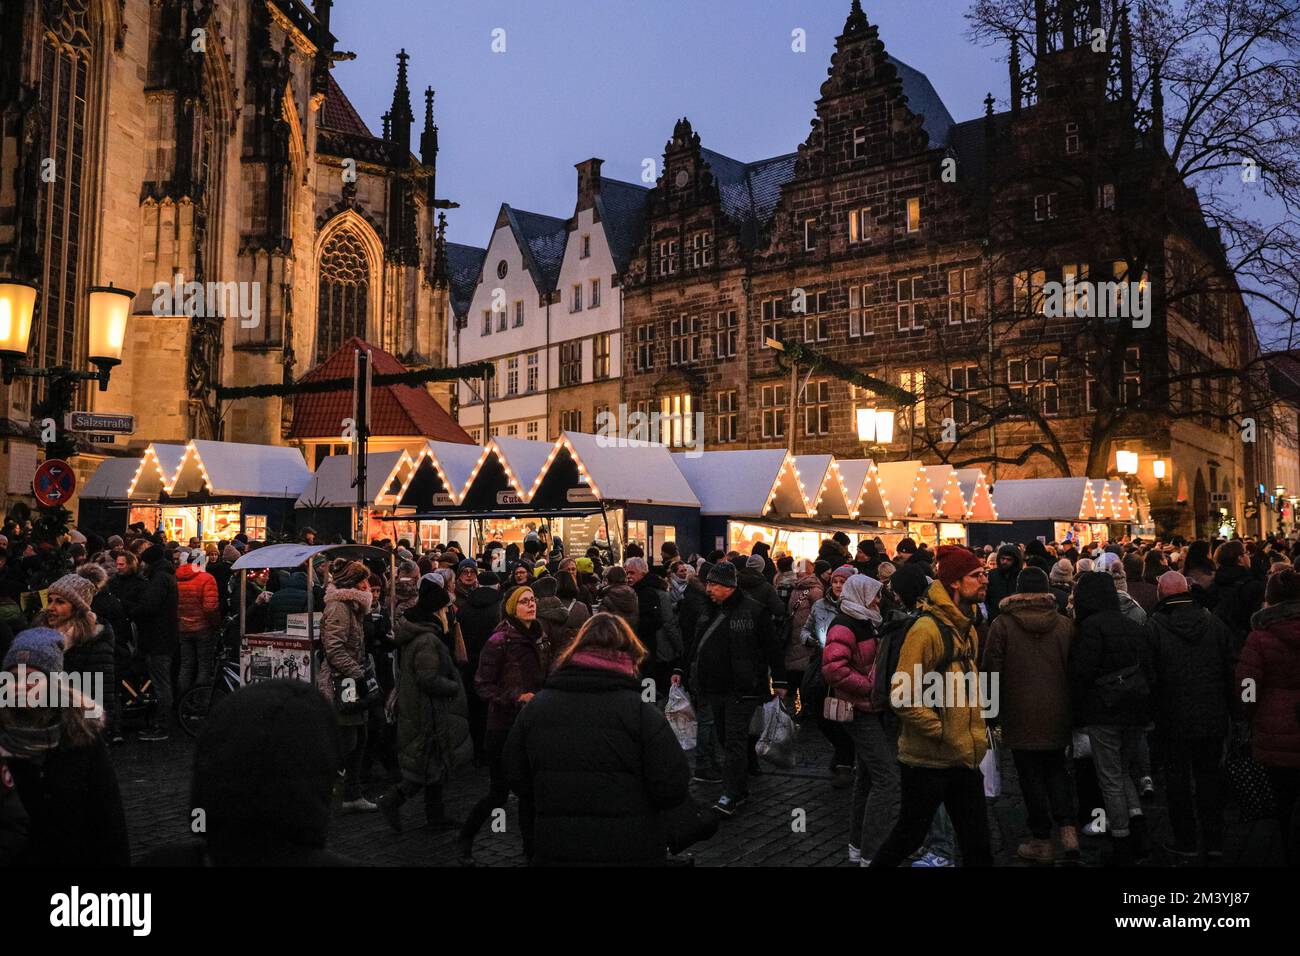 Münster, Germany. 17th Dec, 2022. The Lamberti Church Christmas Market is busy with those looking for gifts and snacksk. The historic city centre of Münster in Westfalia becomes quite crowded with festive shoppers and visitors to the town's 5 inter-connected Christmas Markets, drawing in visitors from nearby cities, coach tours, as well as many Dutch and other day trippers. Credit: Imageplotter/Alamy Live News Stock Photo